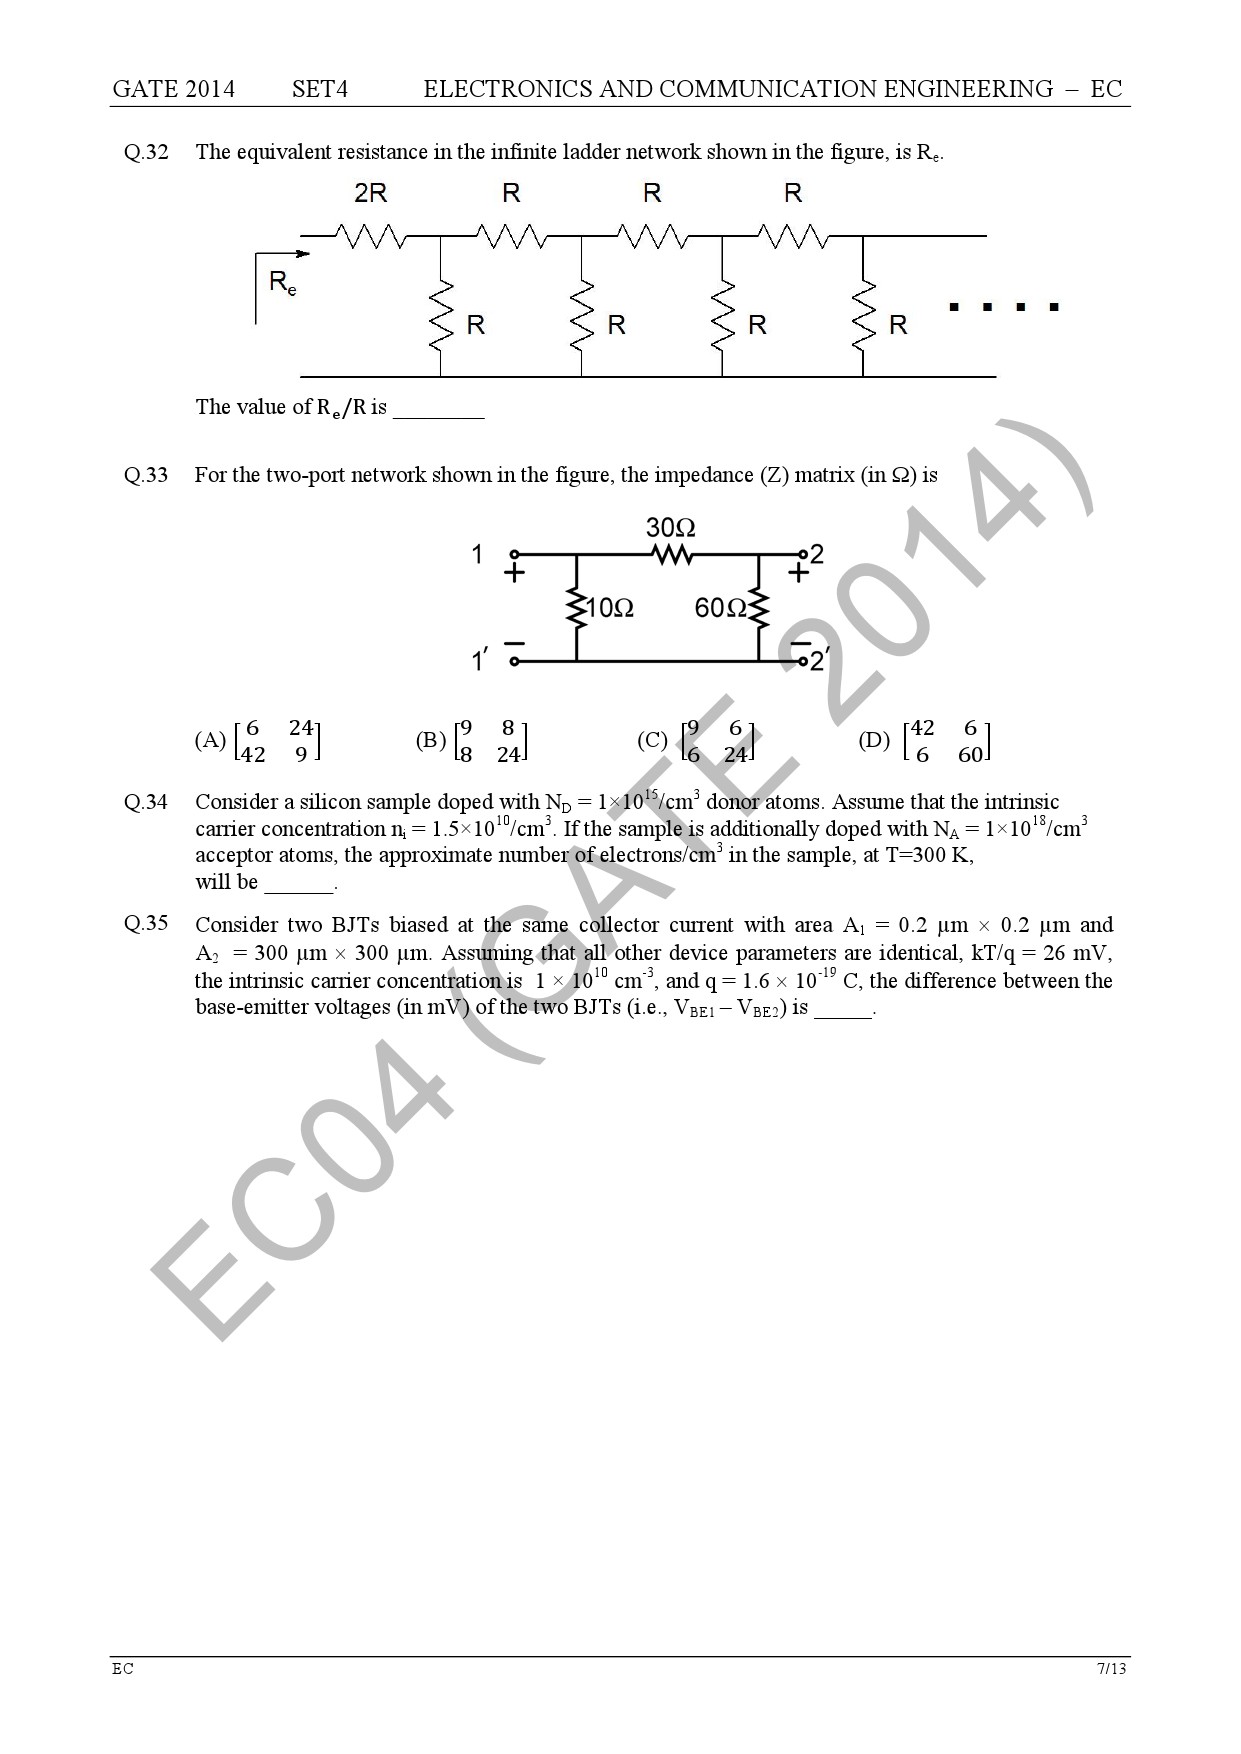 GATE Exam Question Paper 2014 Electronics and Communication Engineering Set 4 13